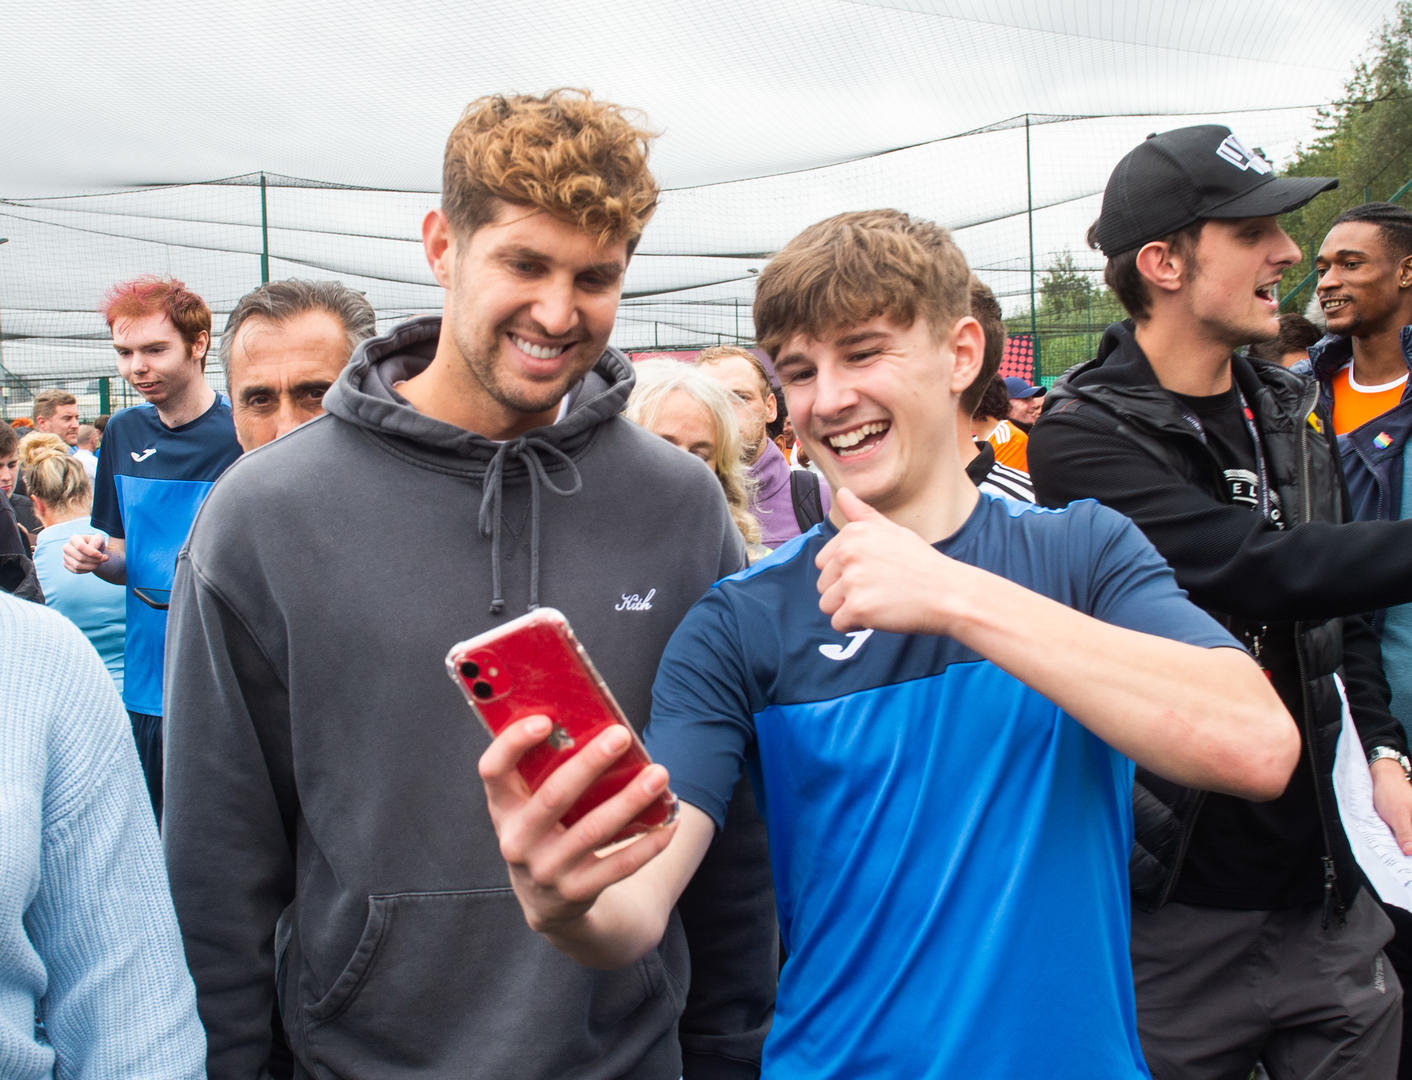 John Stones posing in a selfie taken by a young fan to the left of him